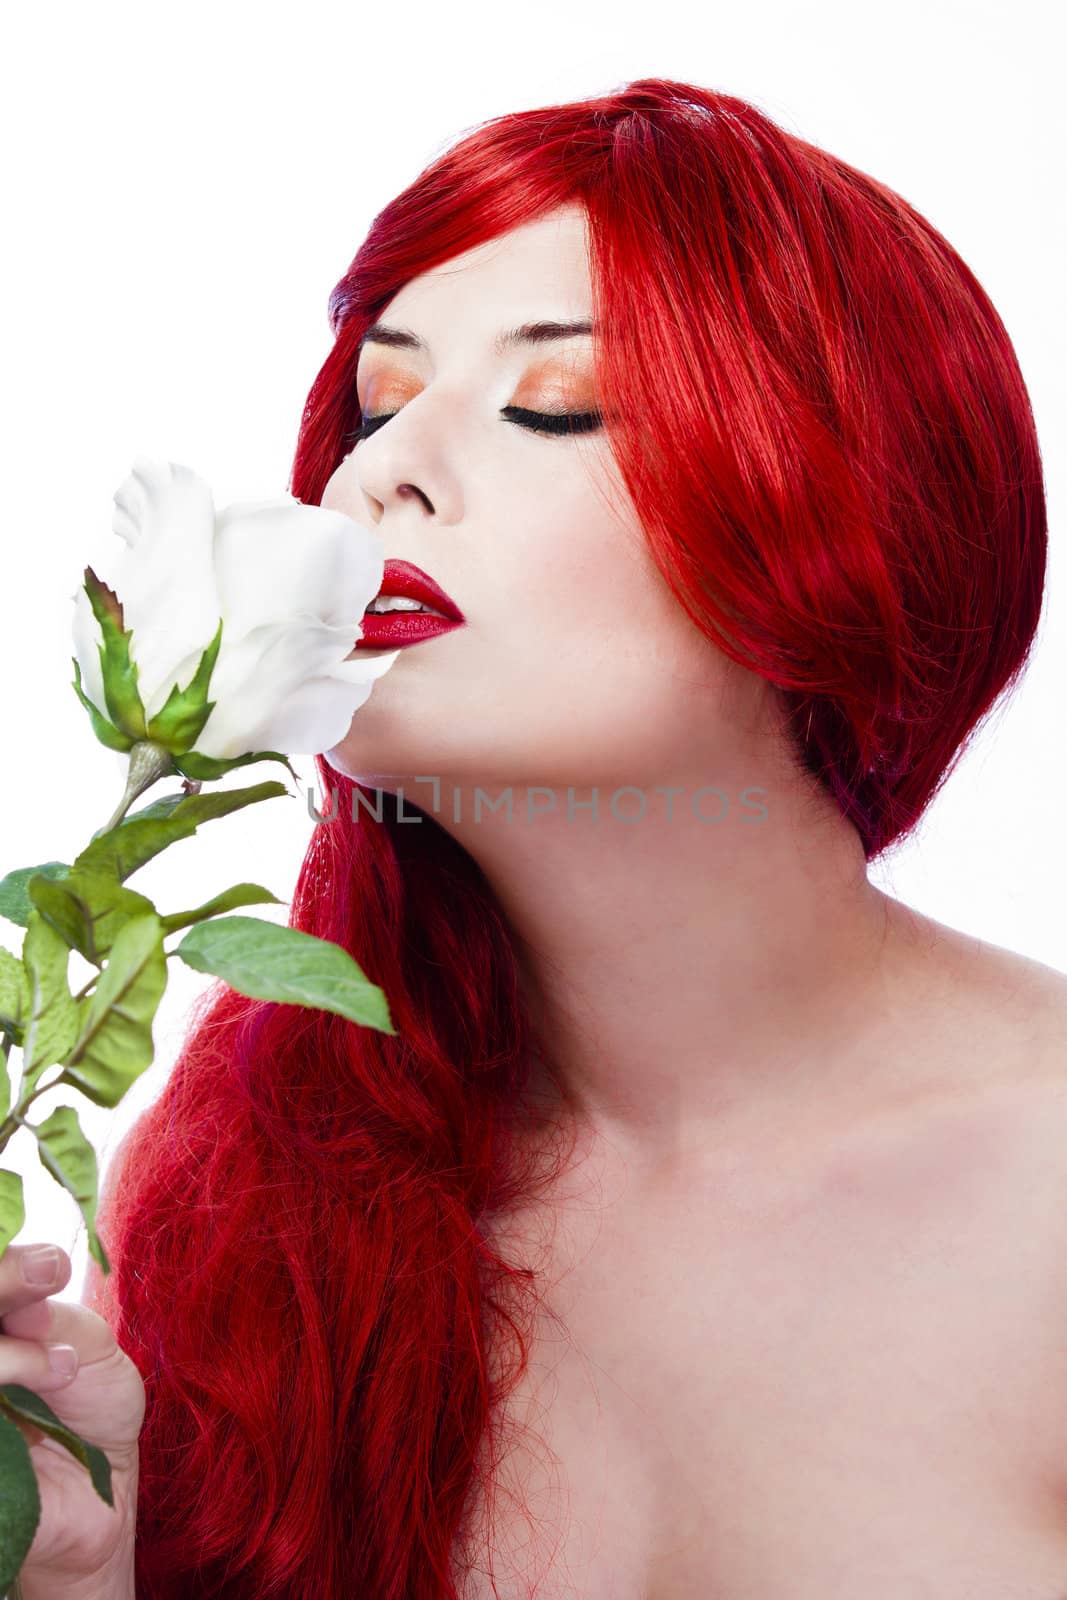 smelling a white rose, spring concept.Red Hair woman. Fashion Girl Portrait.